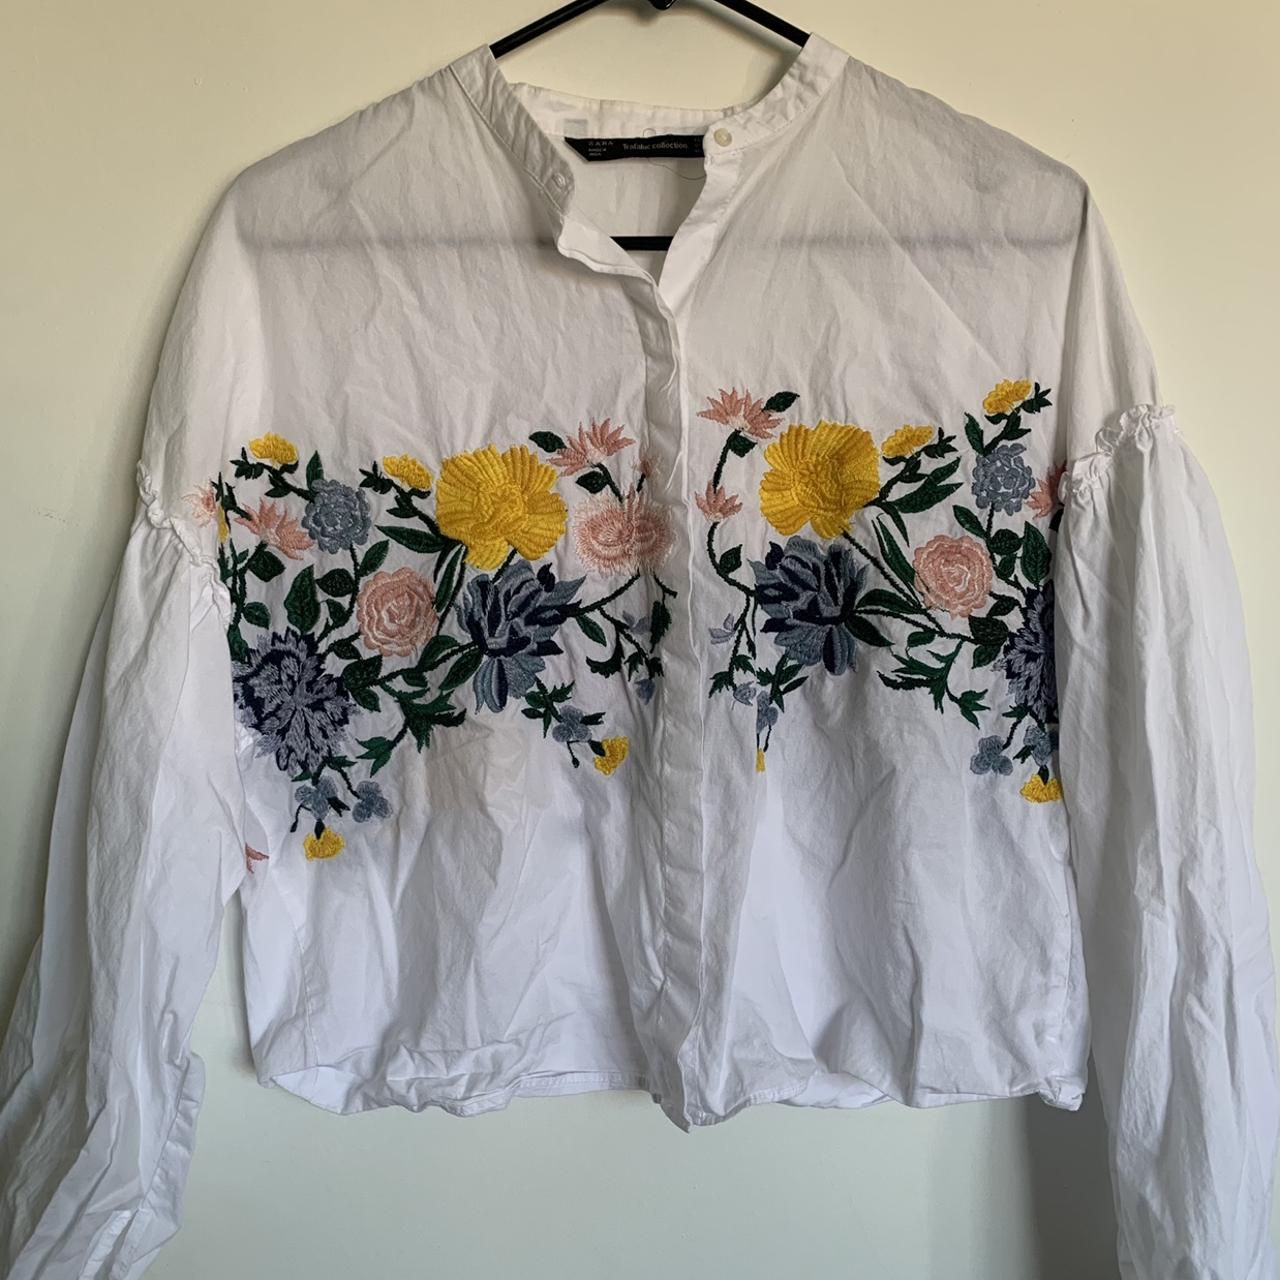 Zara Embroidered Blouse - size small 100% cotton,... - Depop